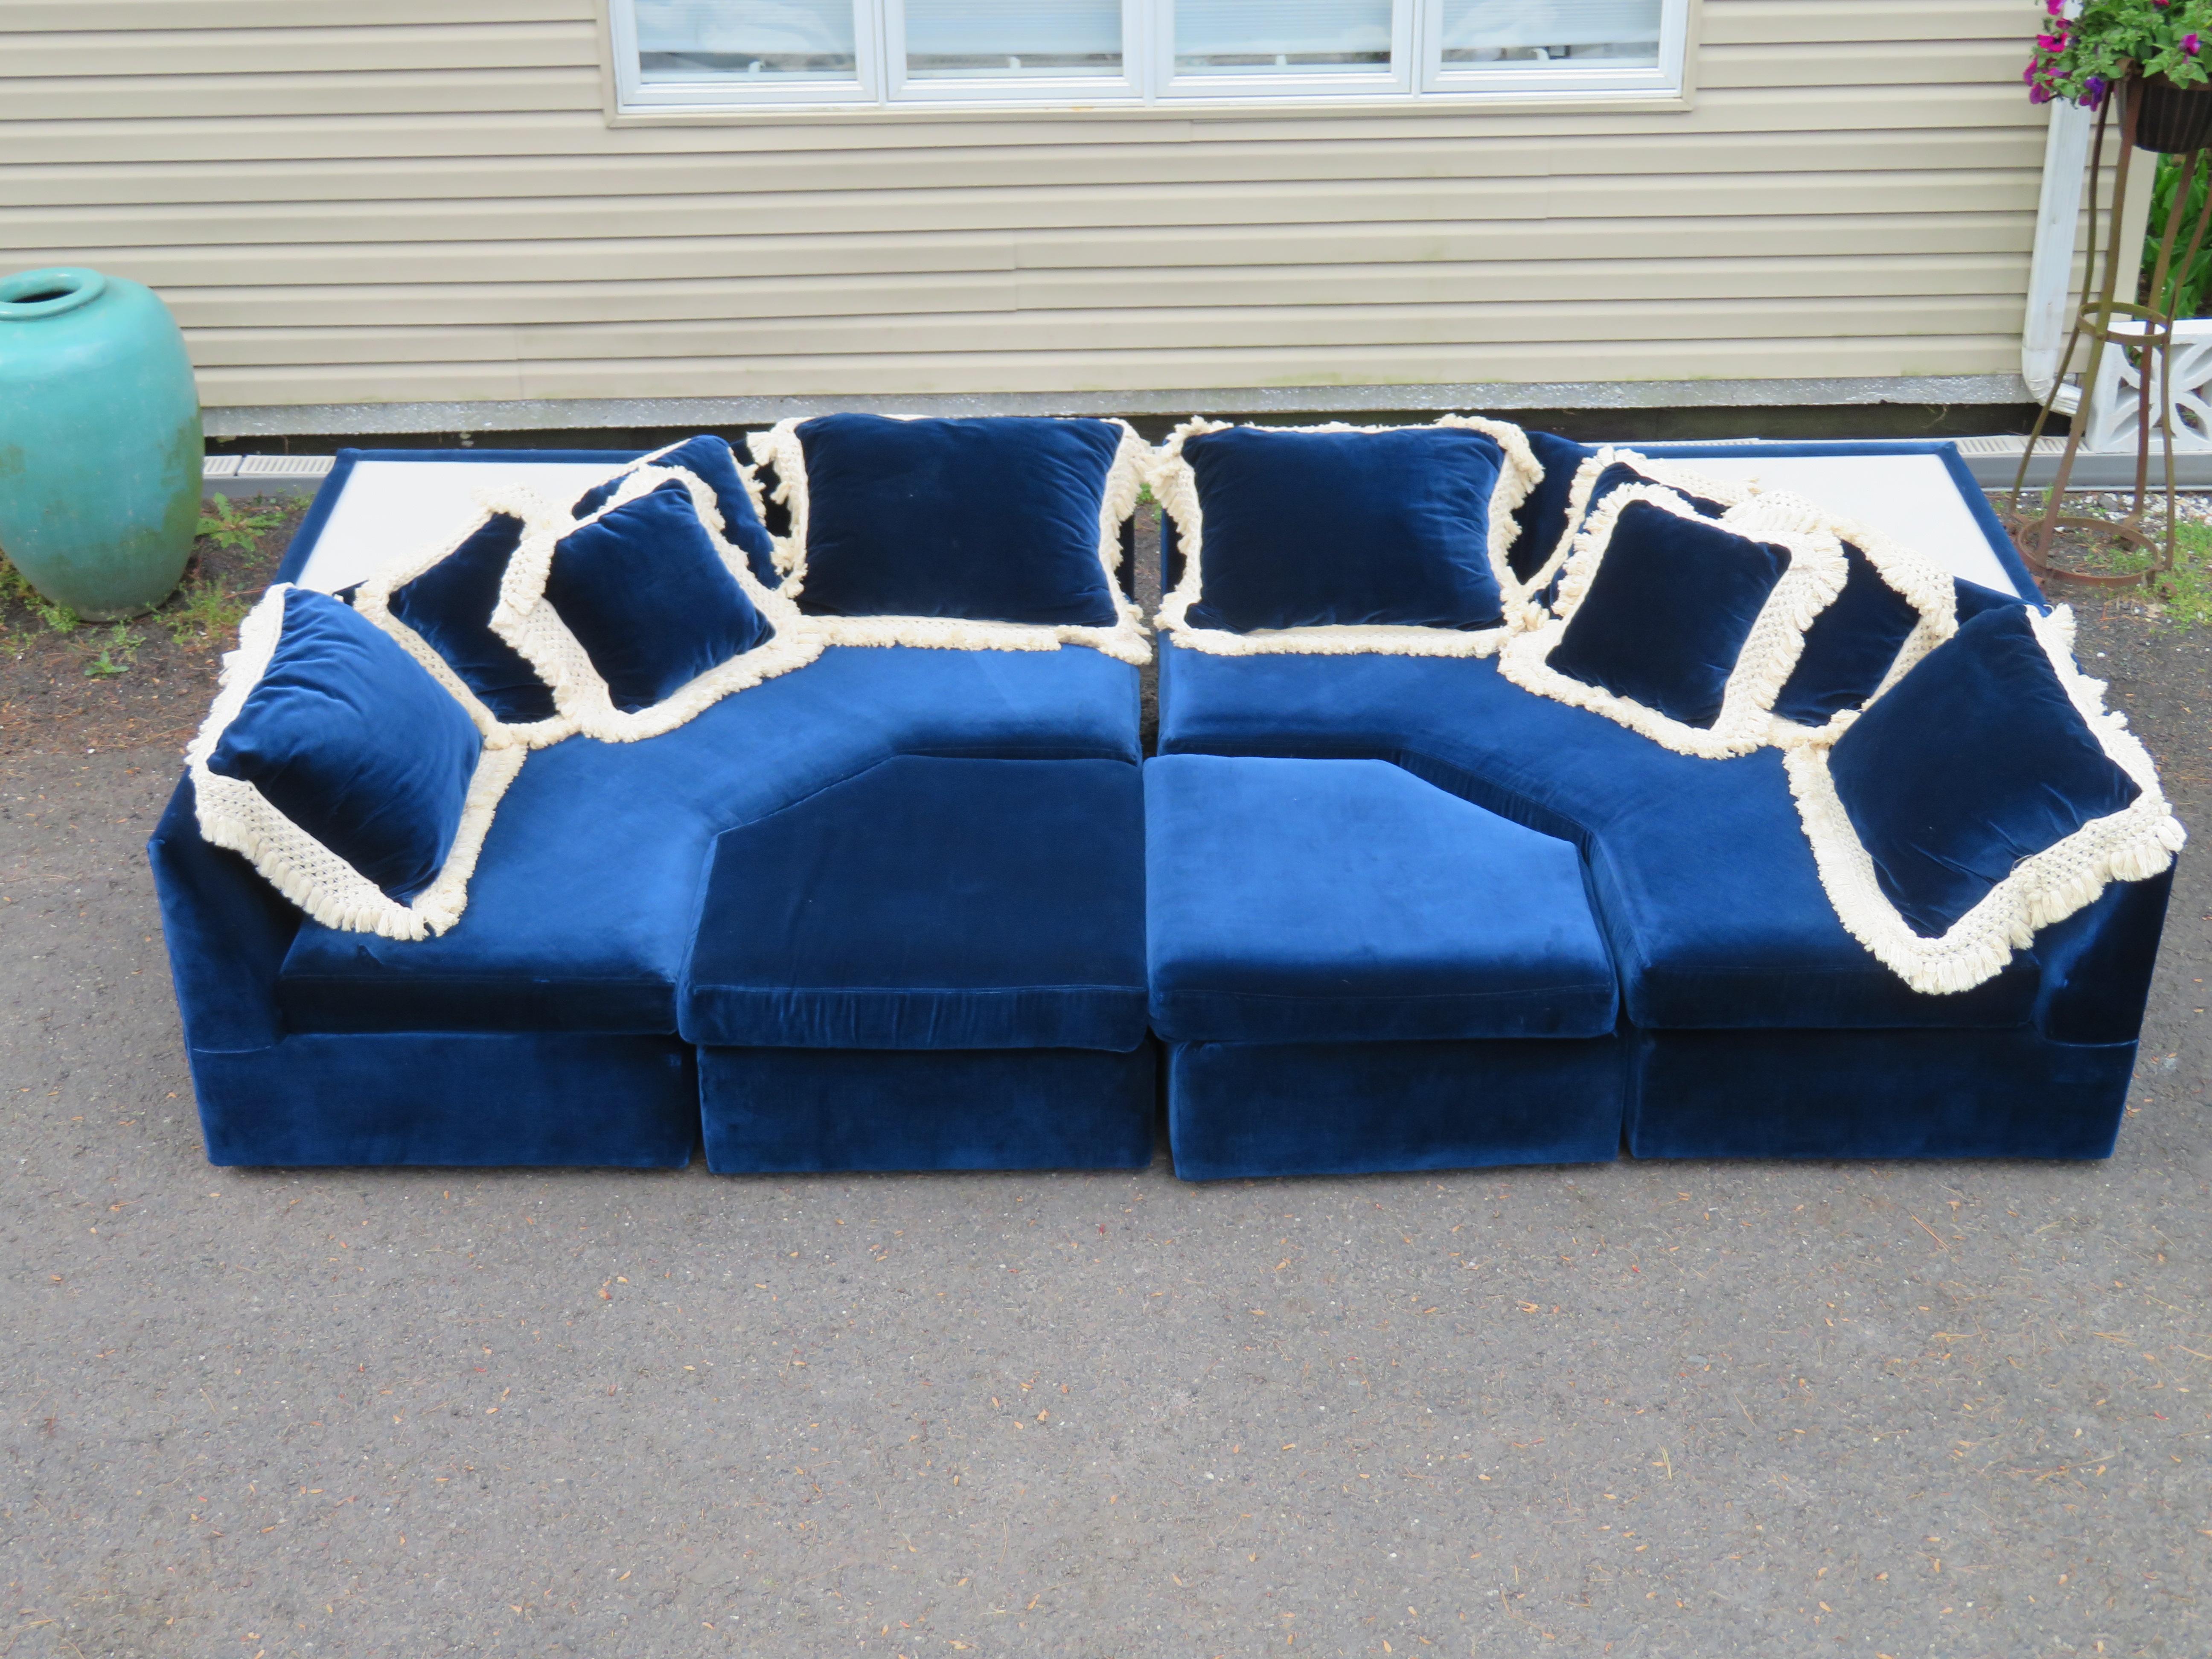 Fantastic 6 Piece Milo Baughman Style Sectional Sofa Carson's Mid-Century Modern In Good Condition For Sale In Pemberton, NJ